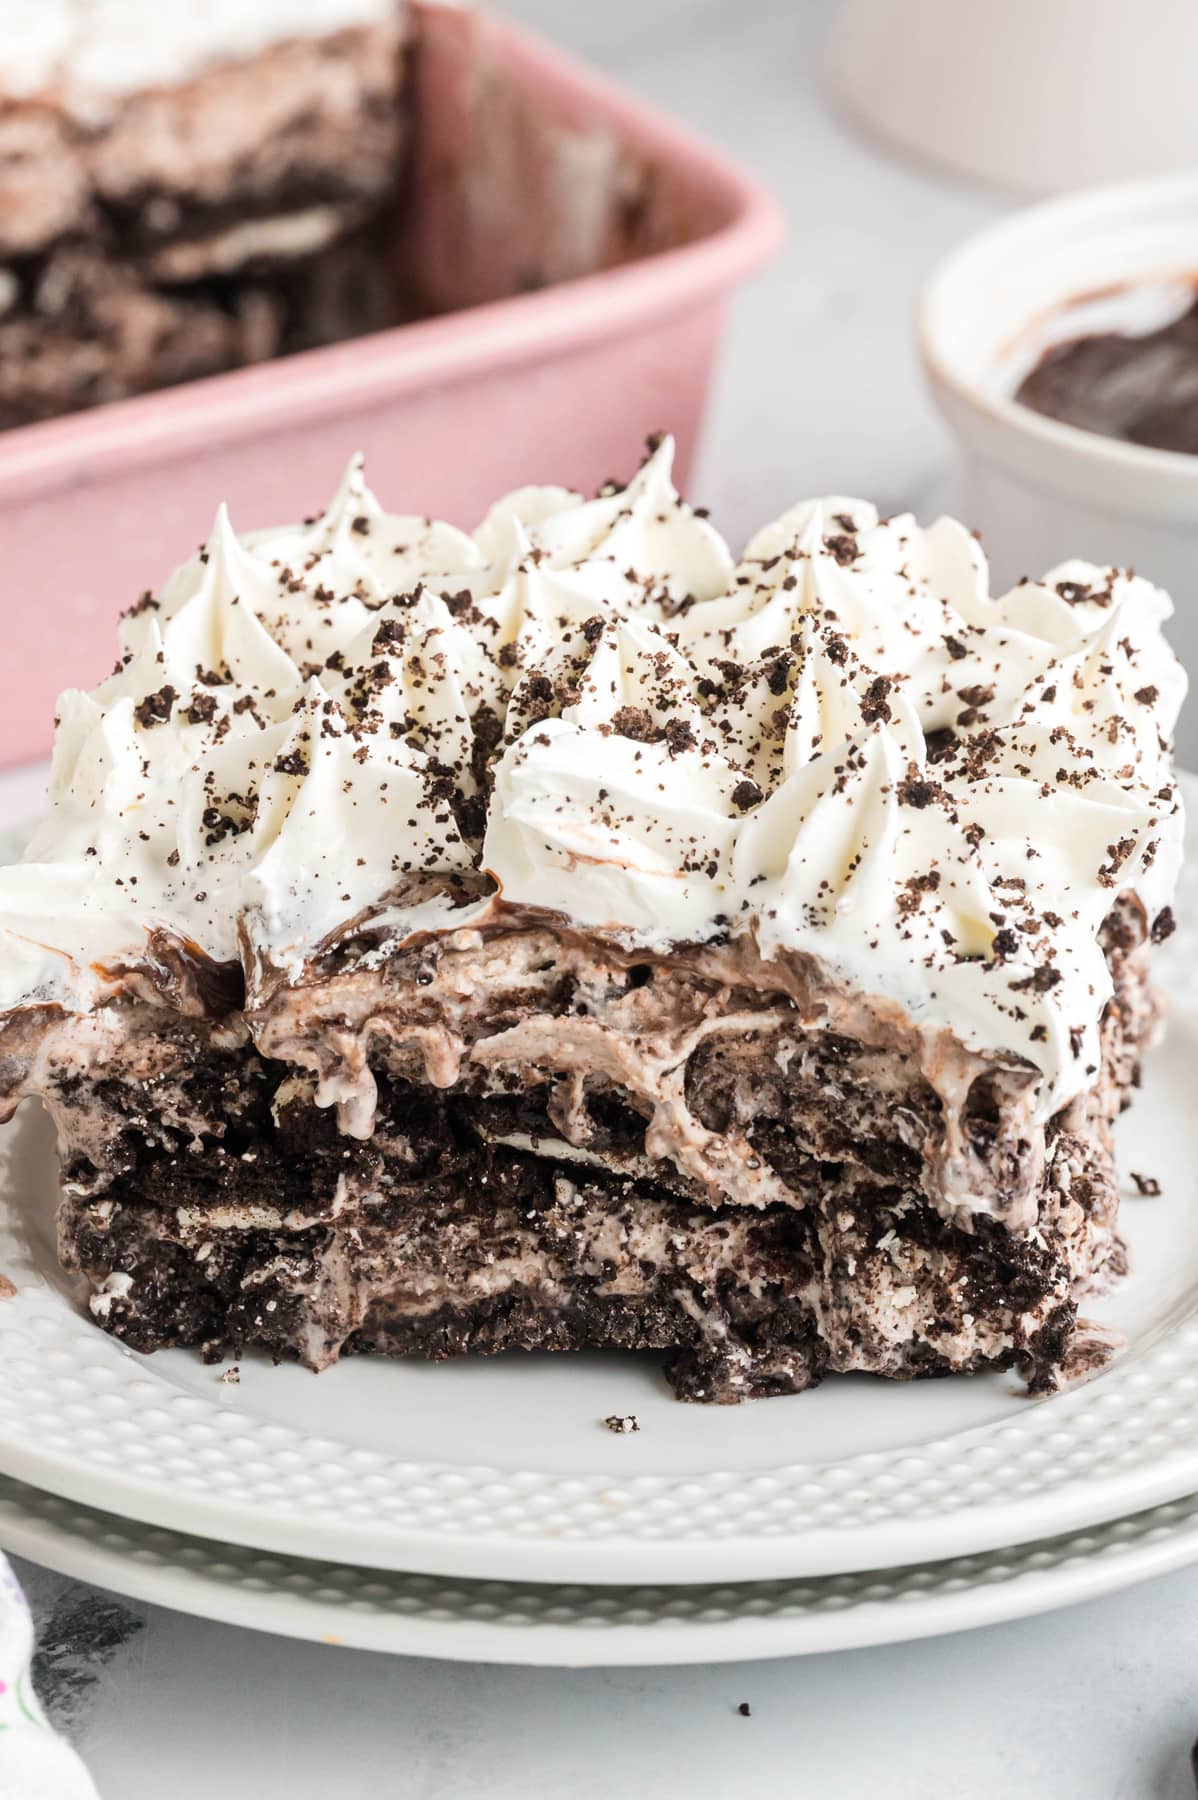 A slice of cookies and cream ice cream cake on a plate